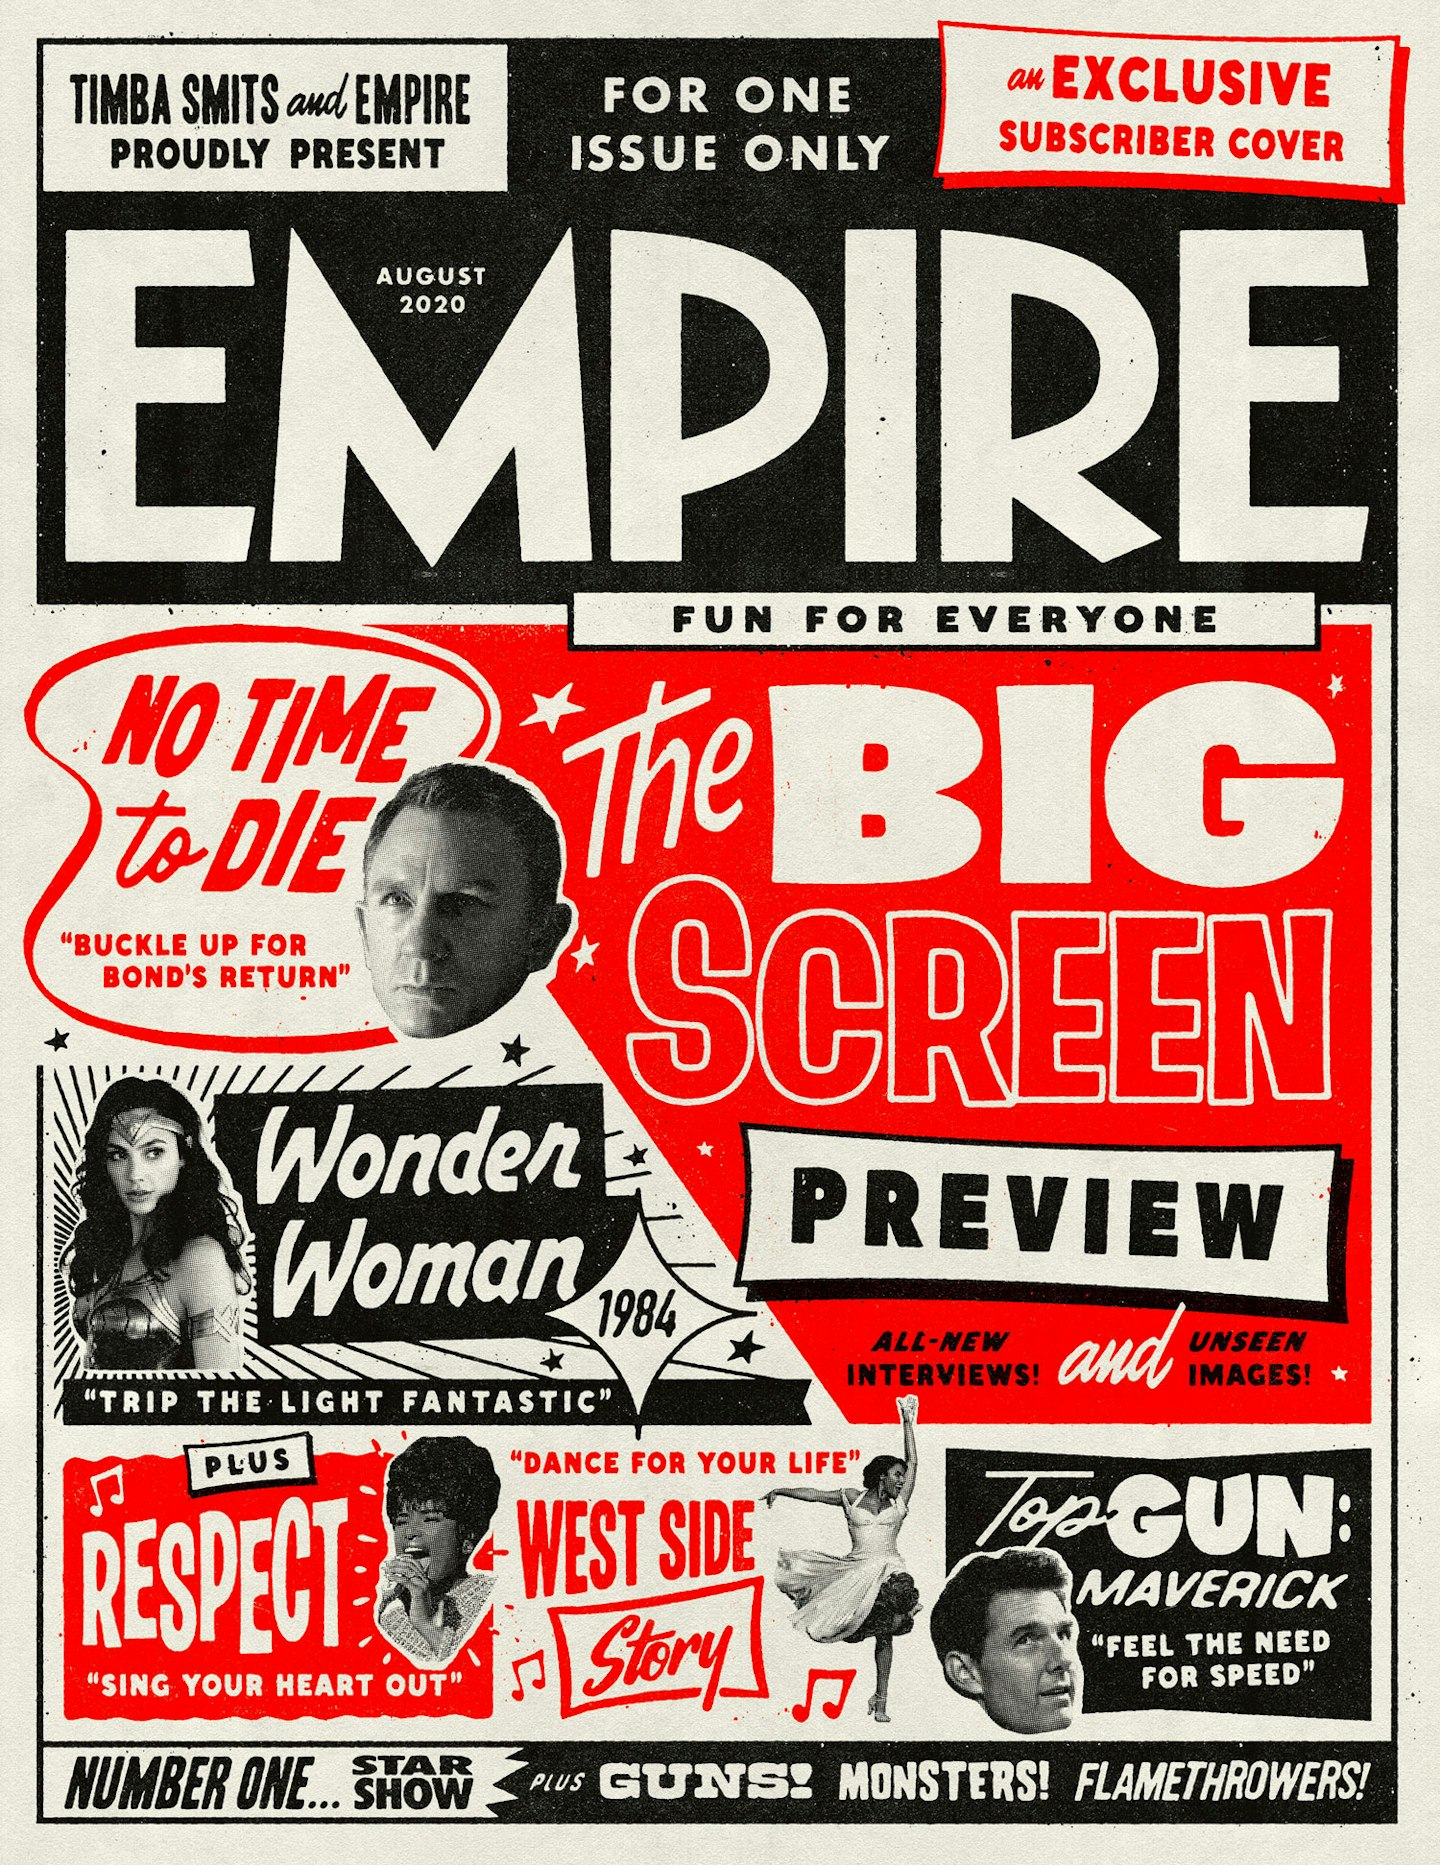 Empire – August 2020 subscriber cover